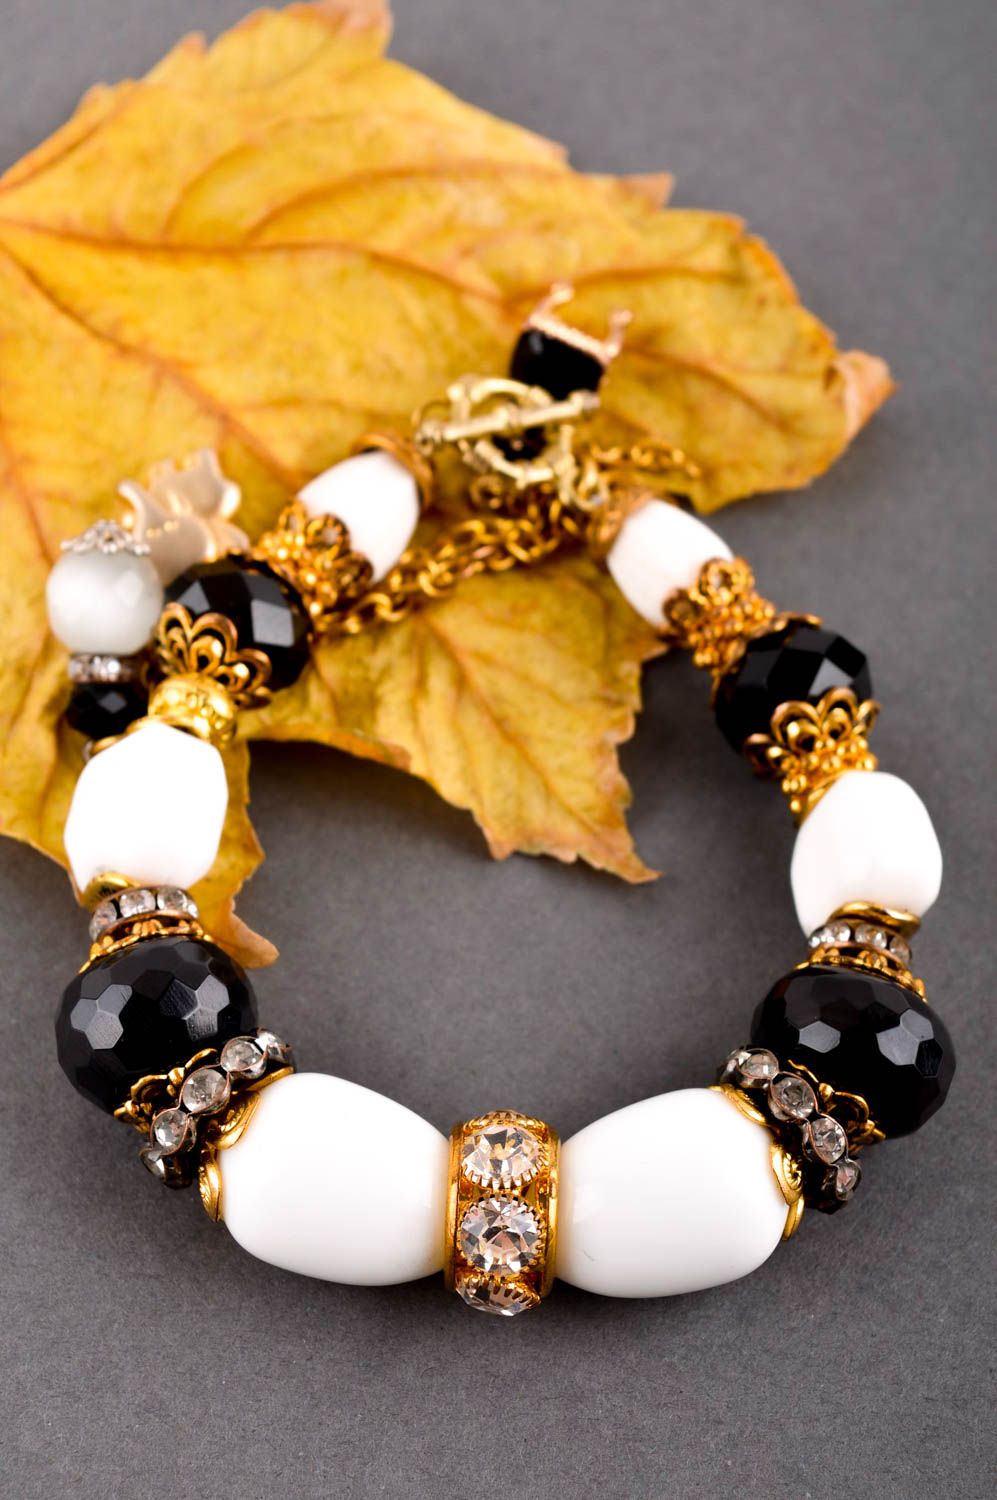 Handmade gemstone beaded bracelet with black and white beads and gold color charms for girls photo 1